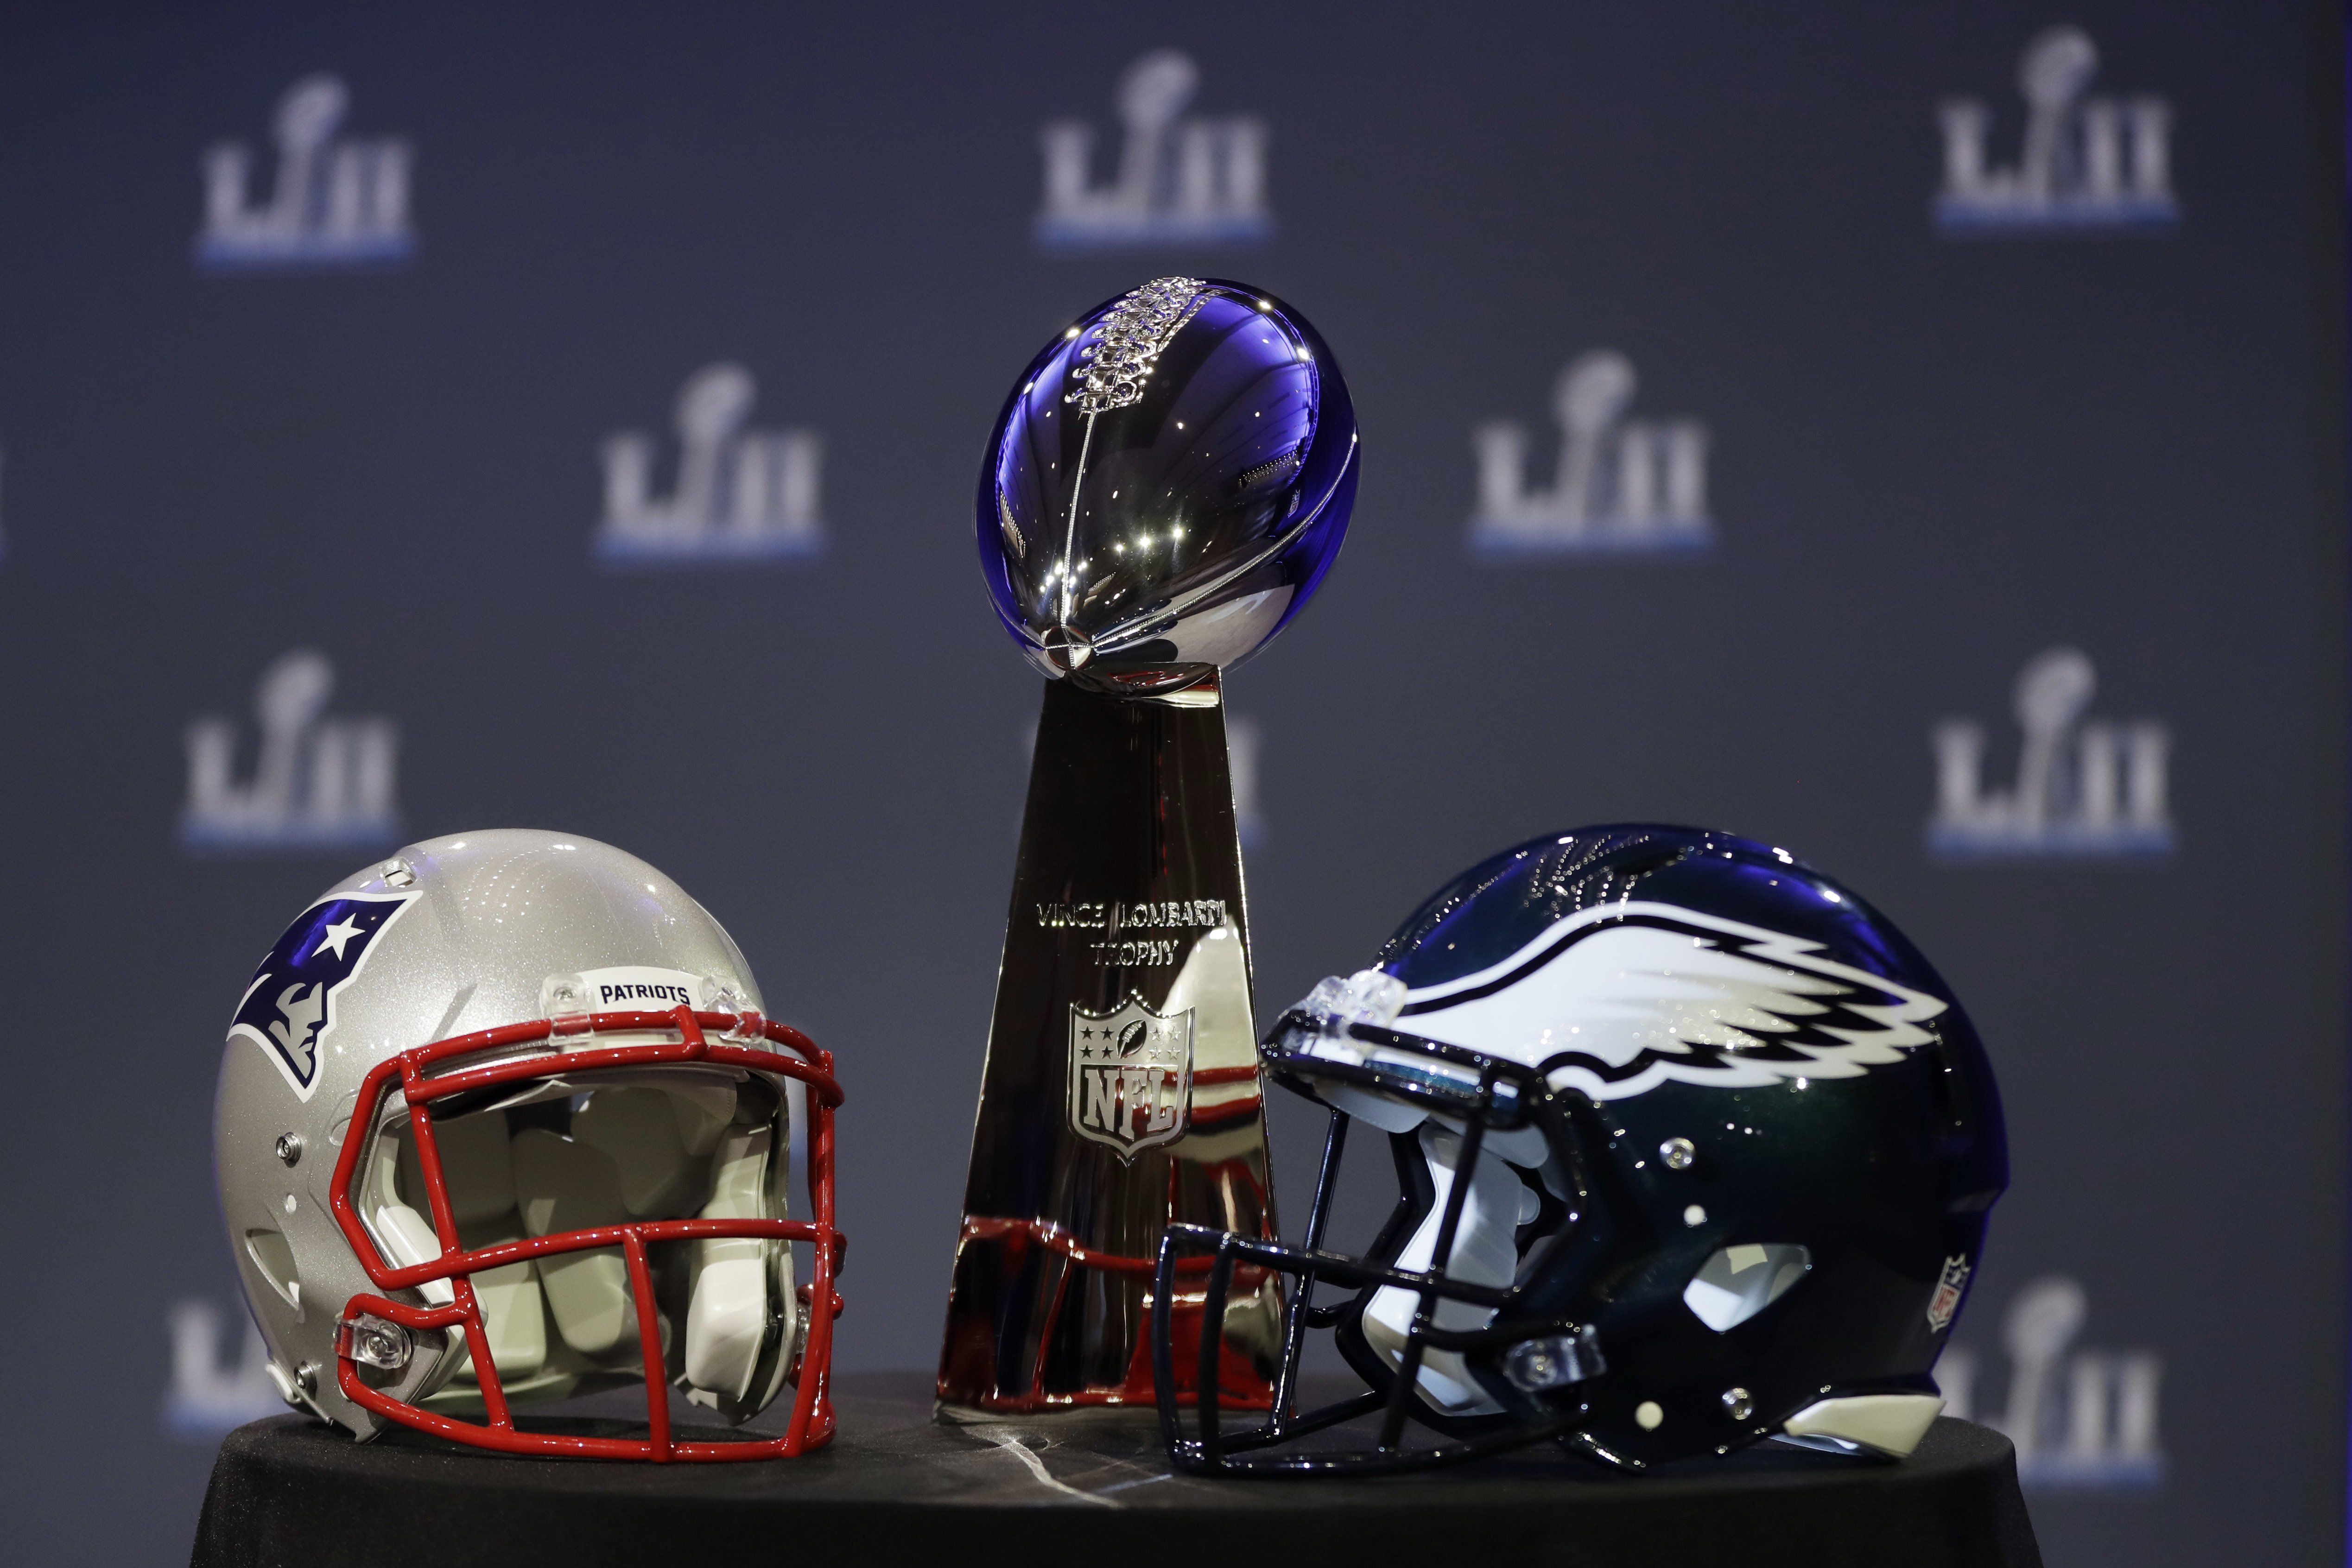 Patriots vs. Eagles: 5 Things to Watch in the Super Bowl